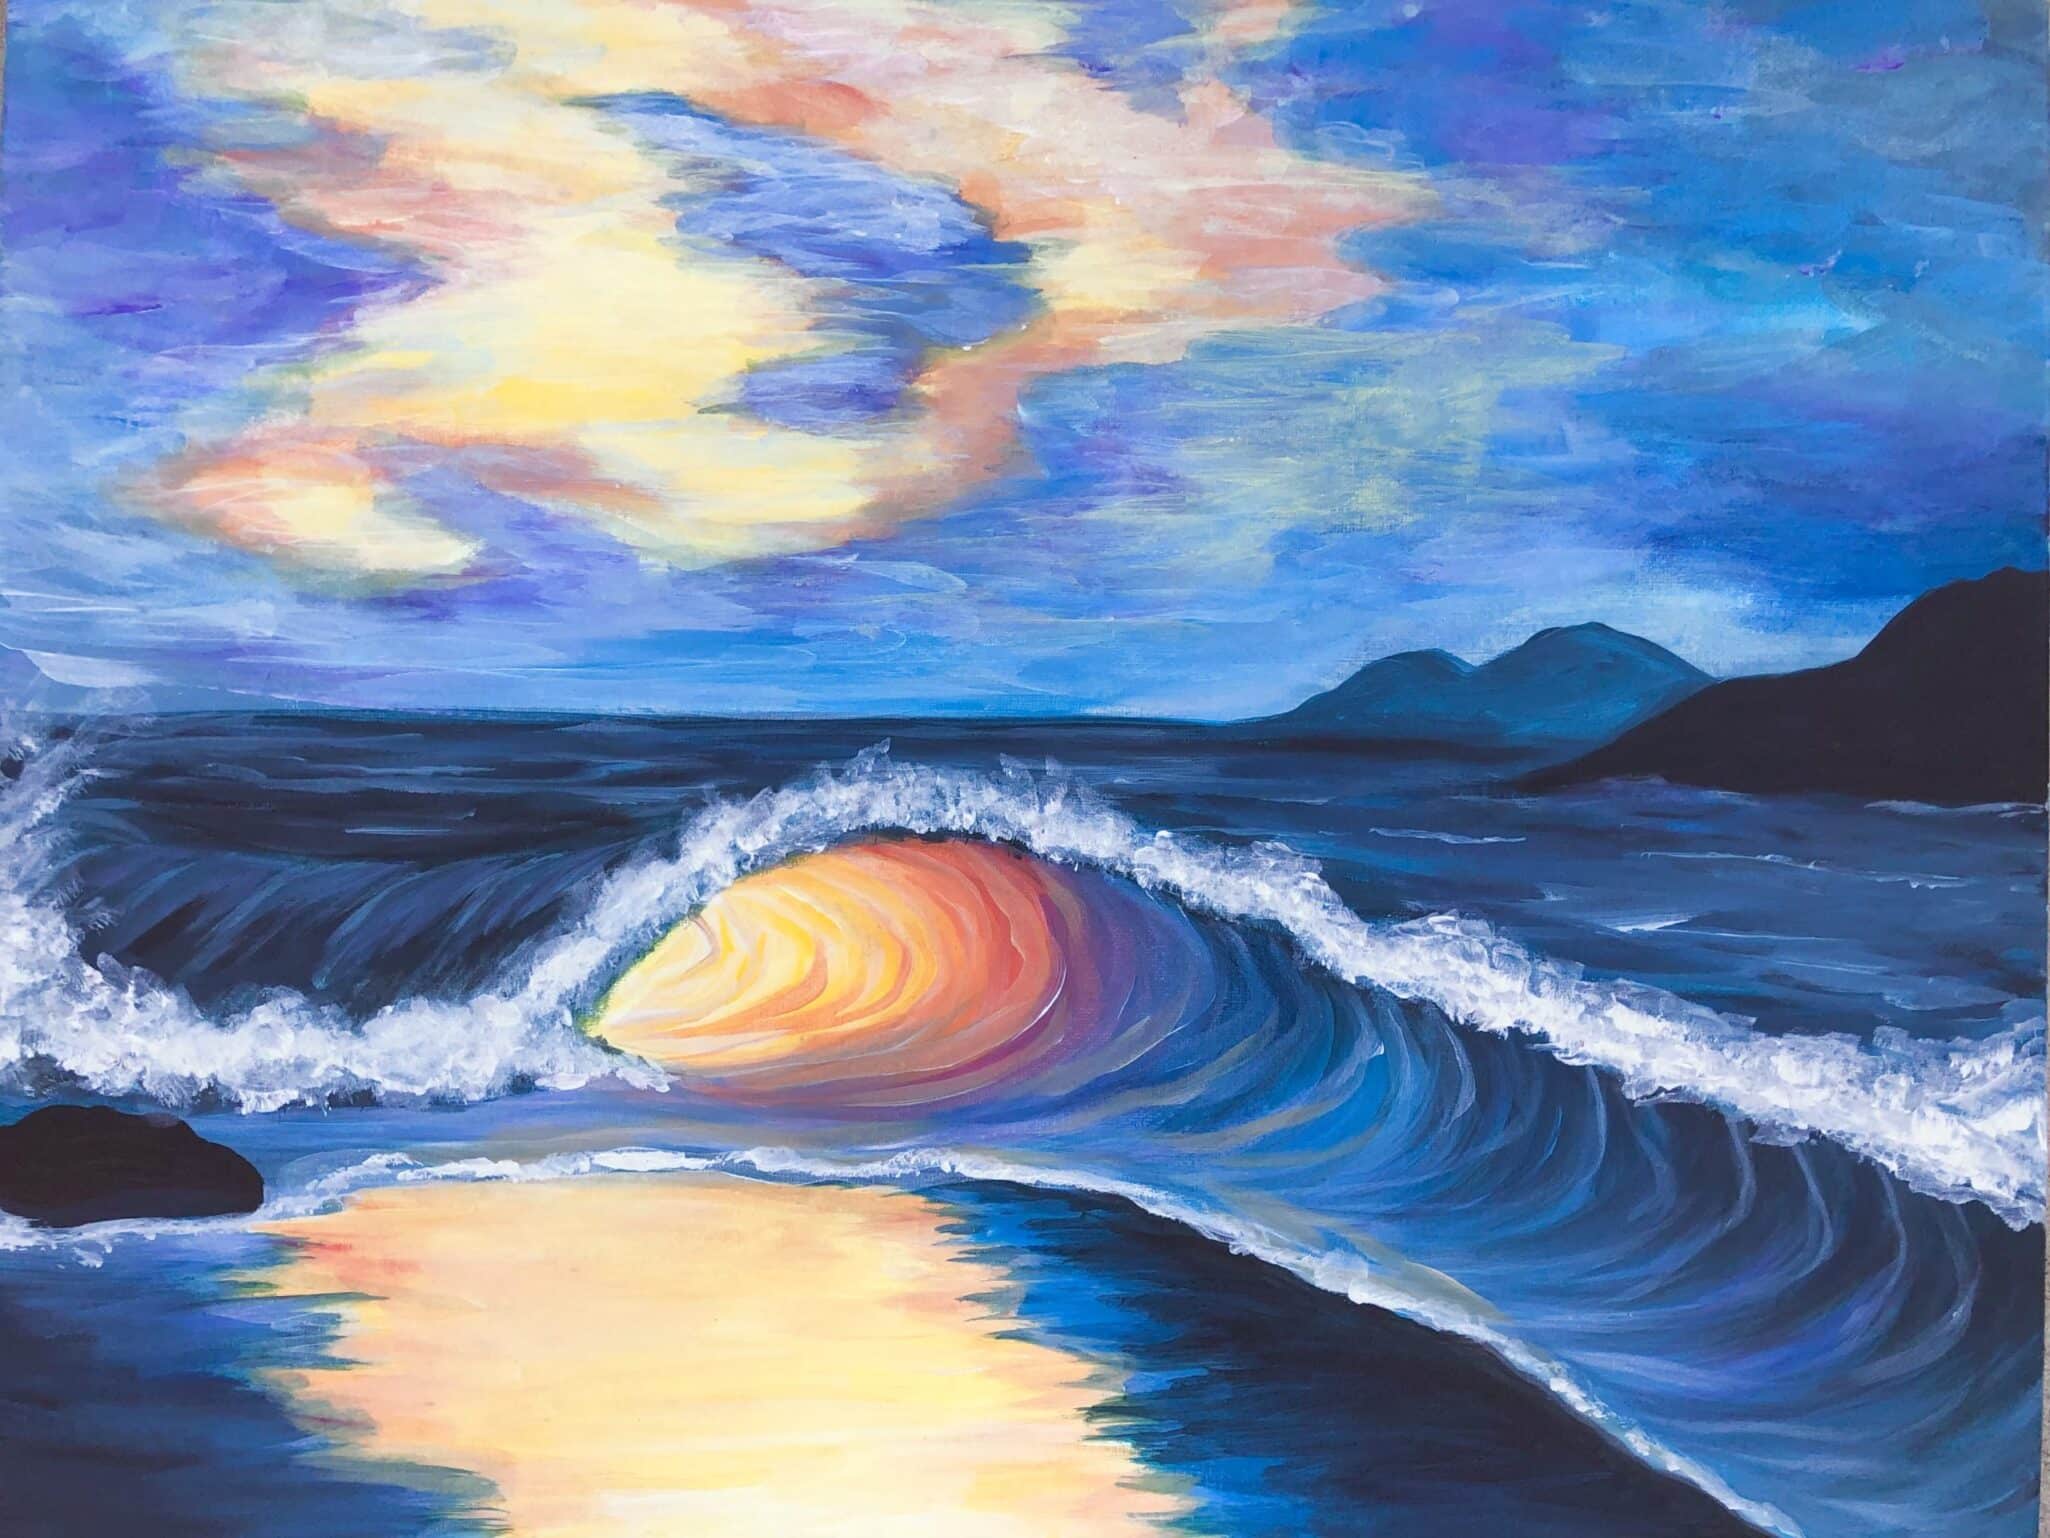 Image of painting called 'Sunset Wave'